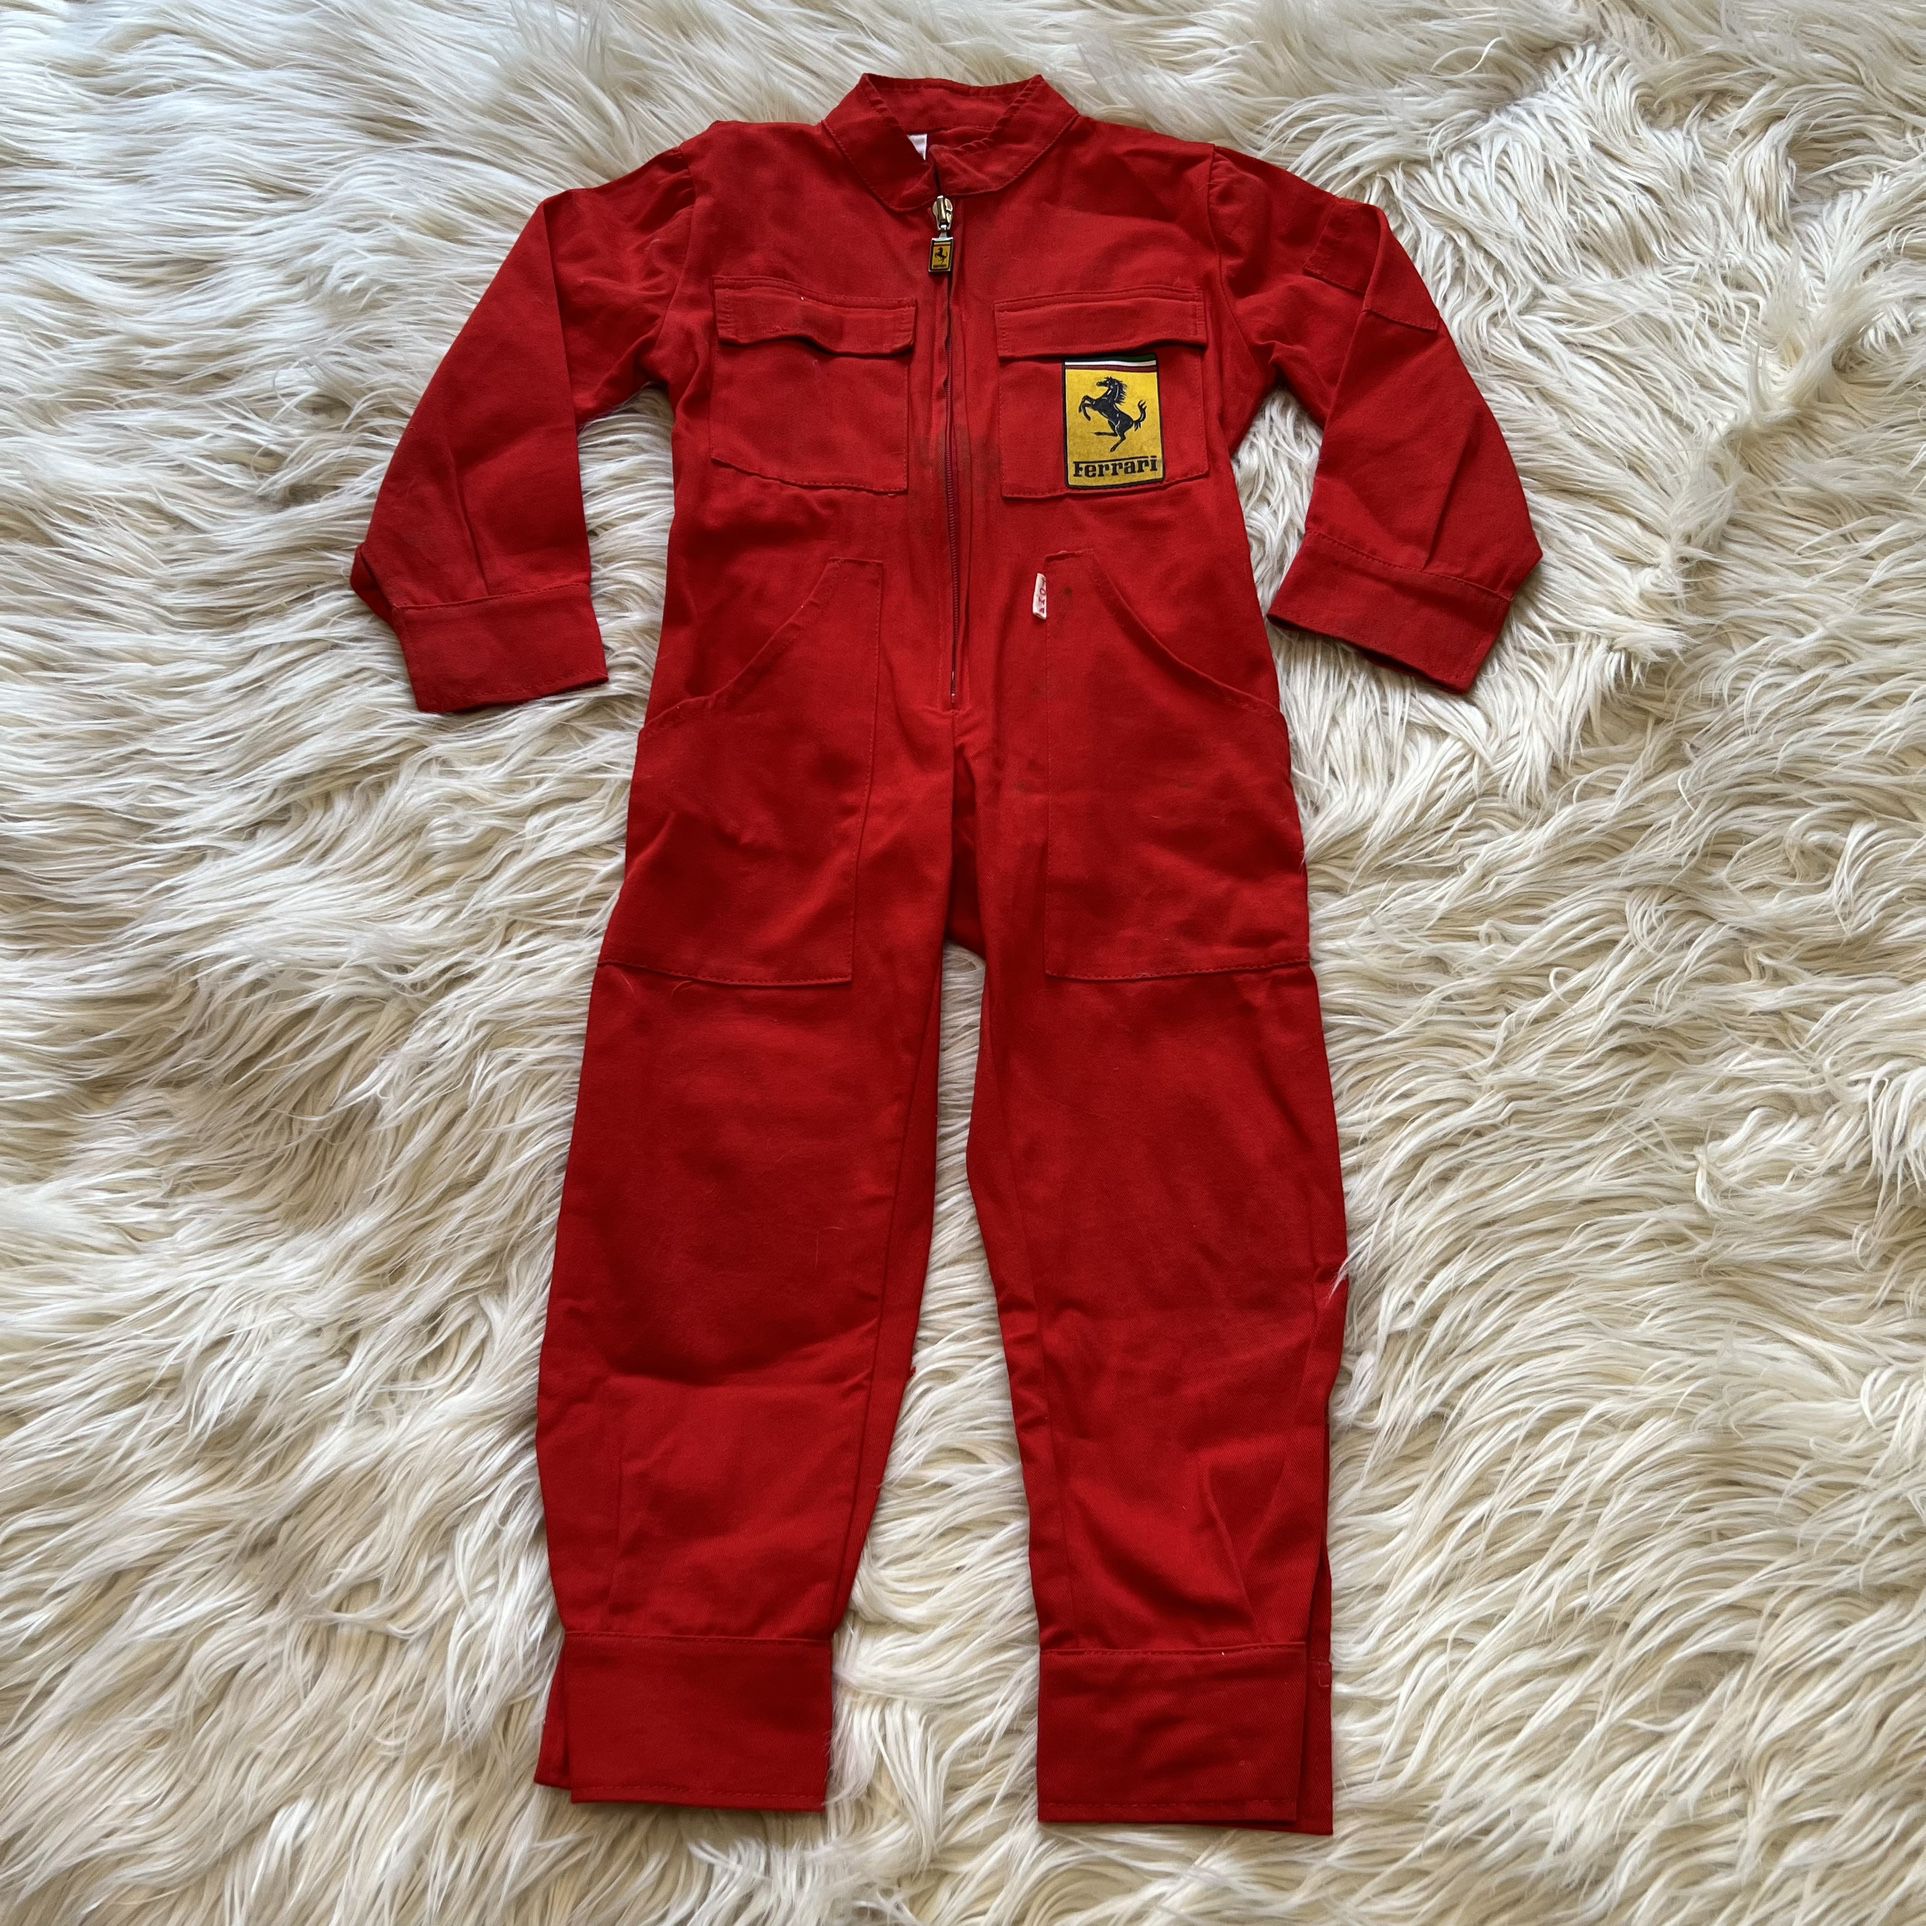 Vintage Toma Ferrari Red Racing Suit Coveralls Italy Juniors Size Small Kids